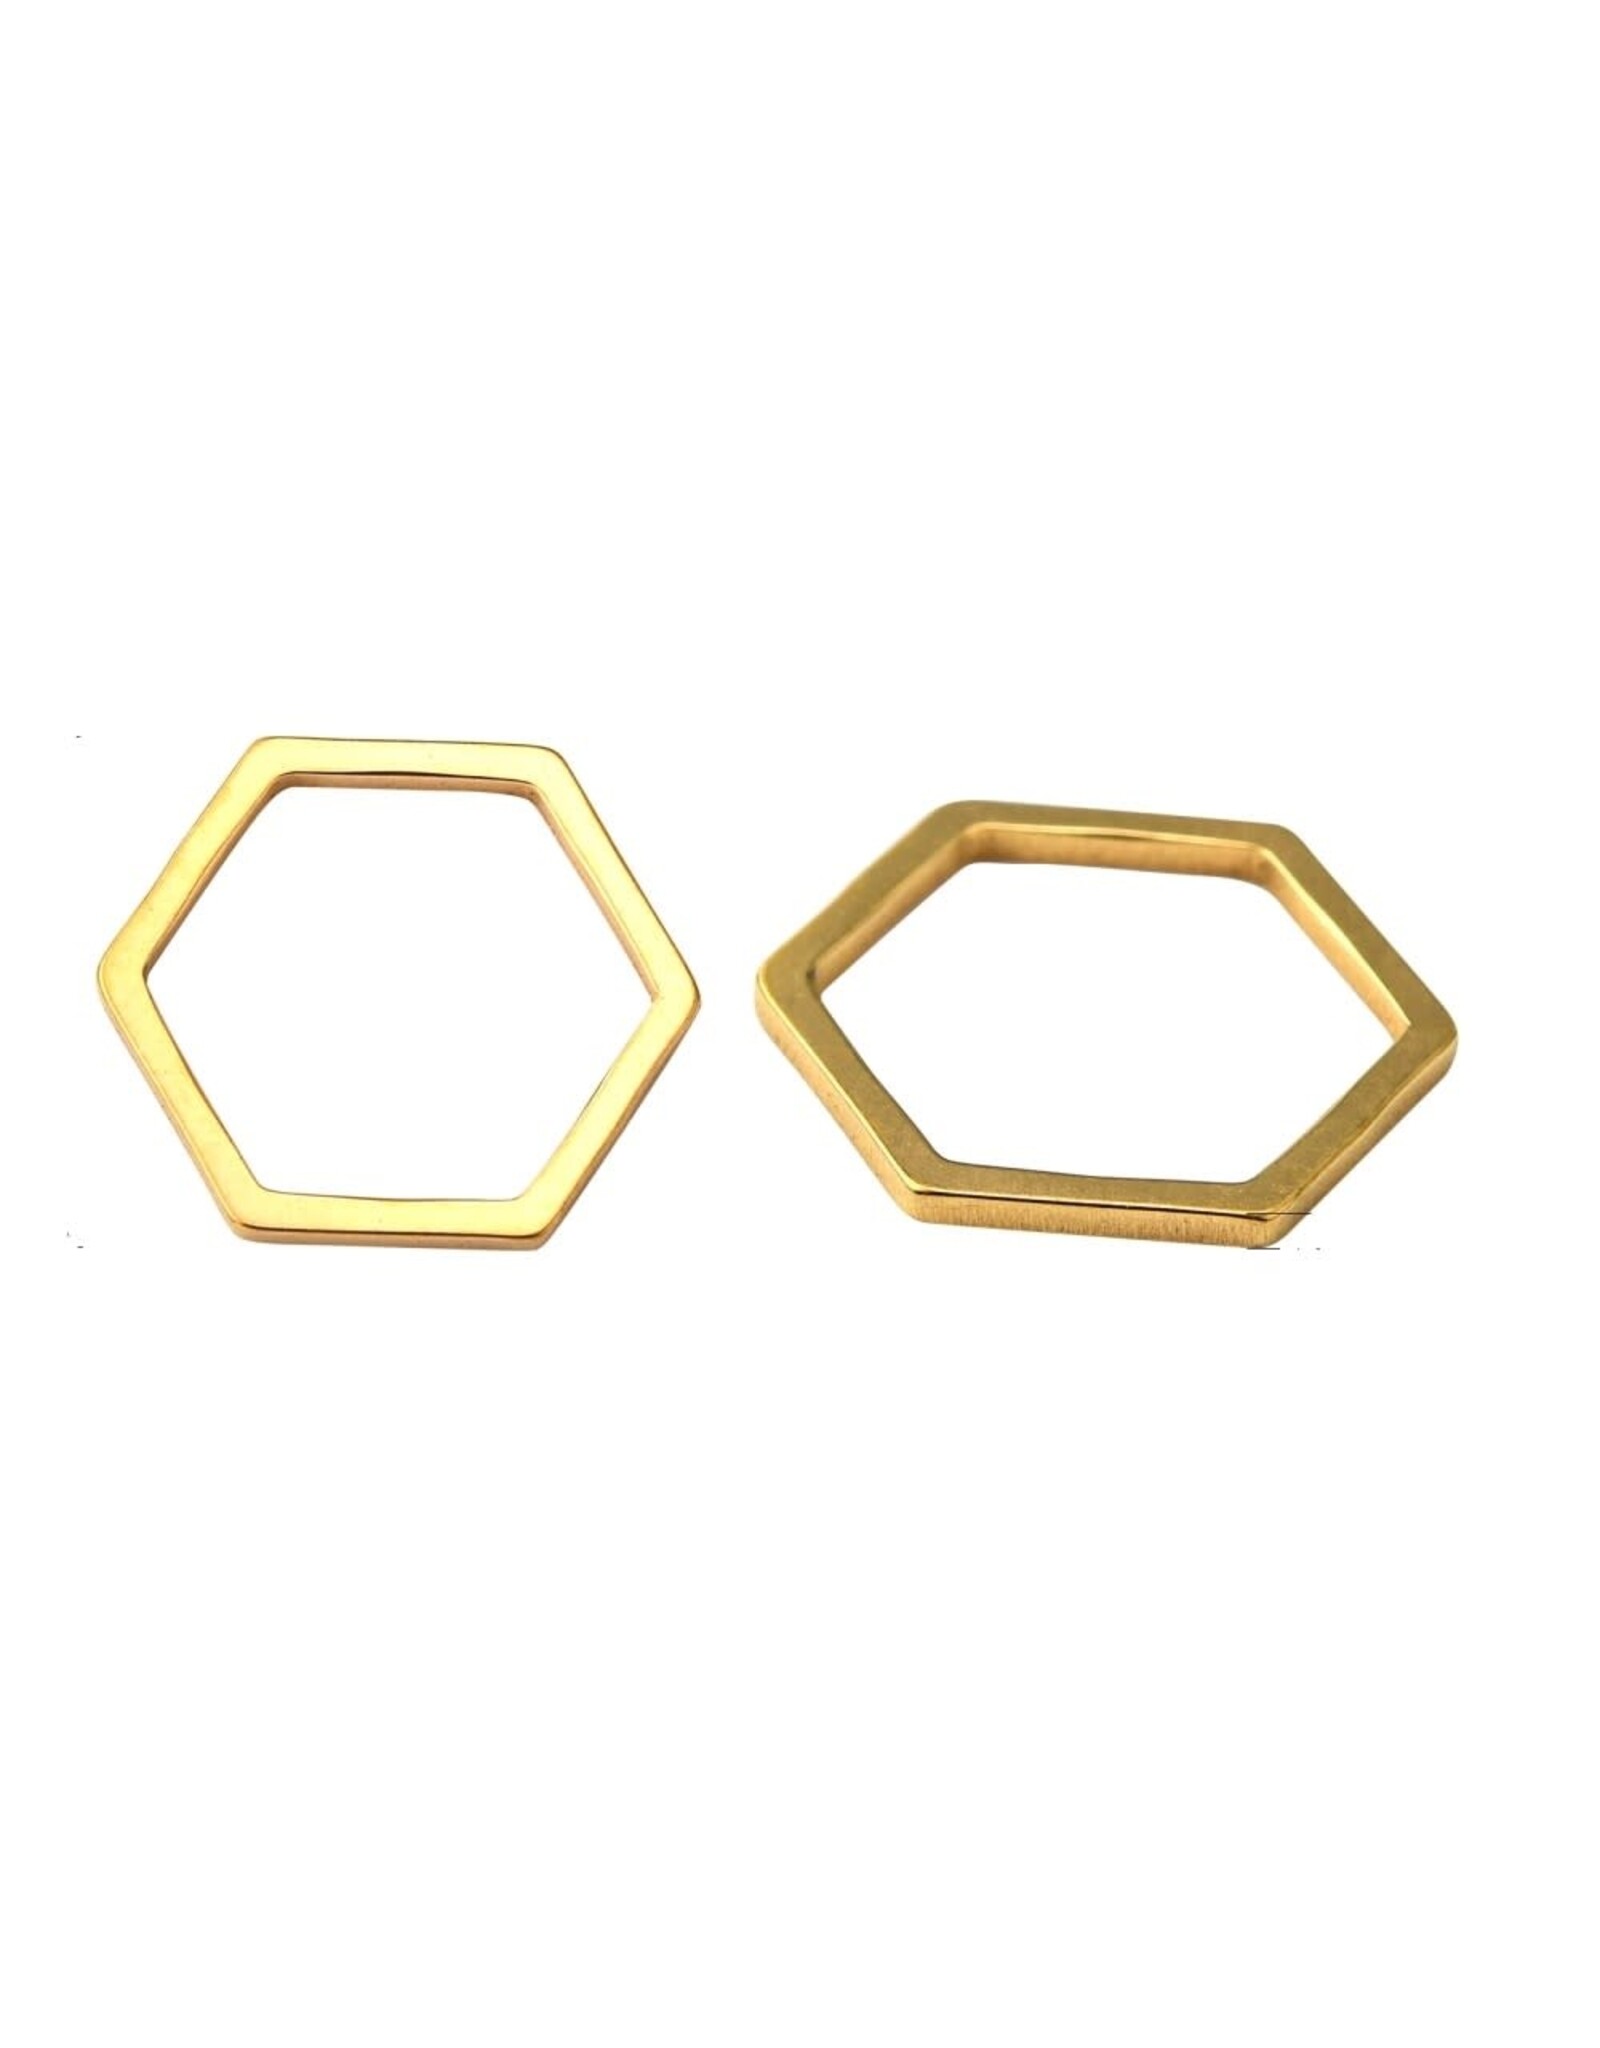 Hexagon Link  14x12mm Stainless Steel Gold x10  NF